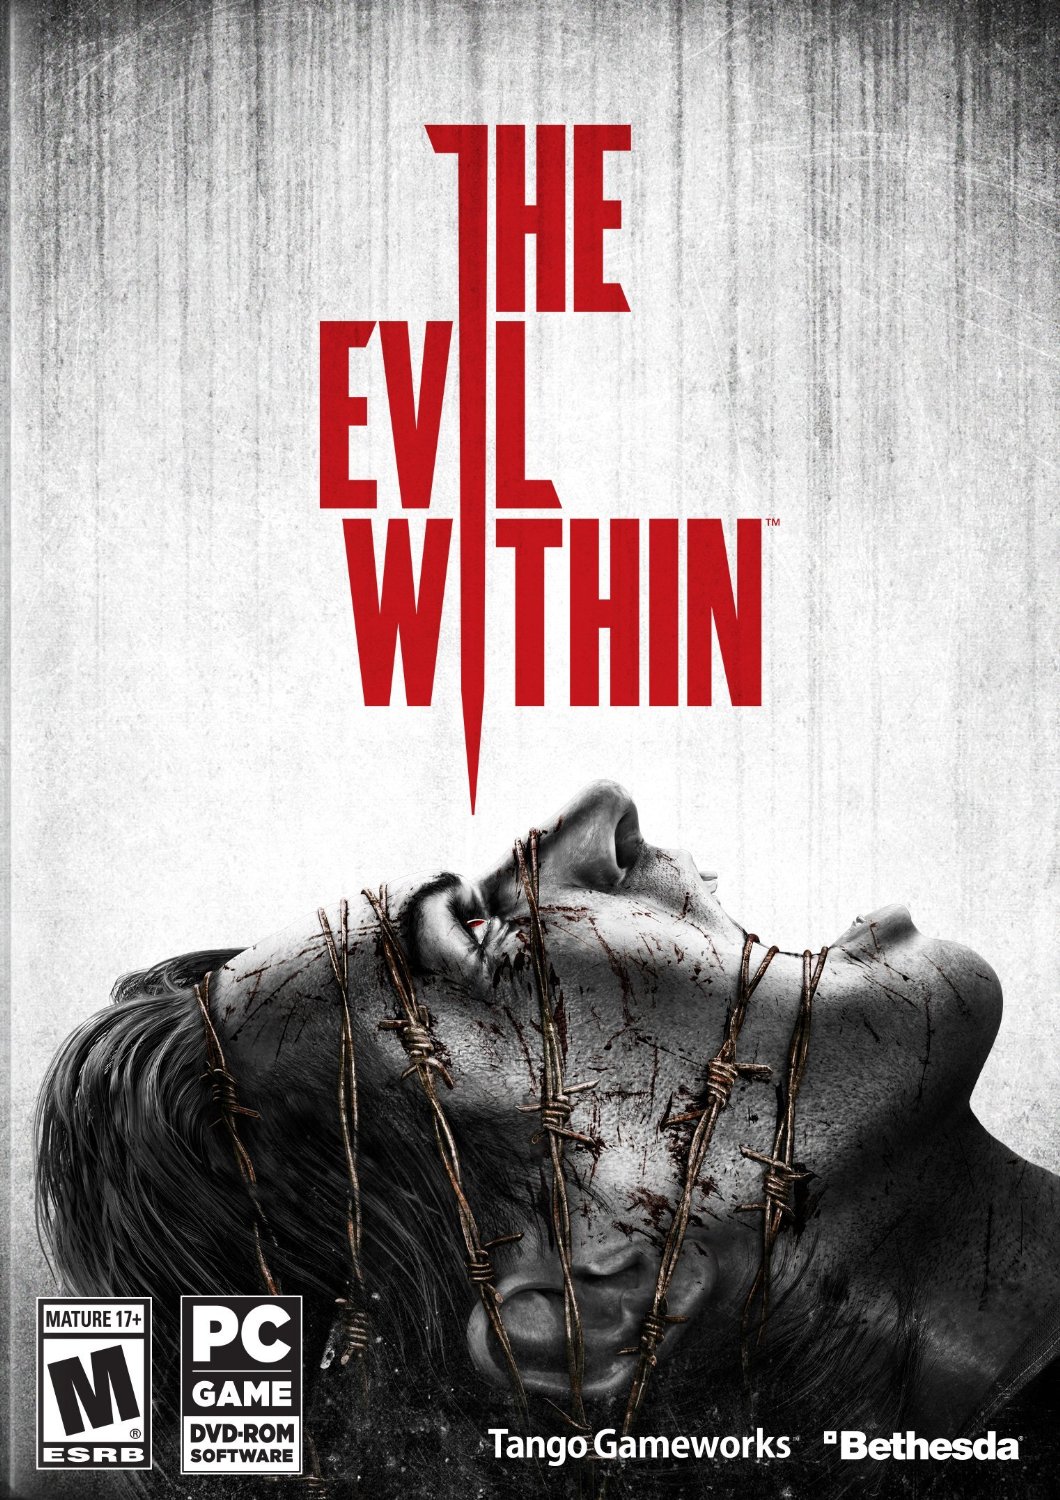 https://rozup.ir/up/narsis3/Pictures/The-Evil-Within-pc-cover-large.jpg